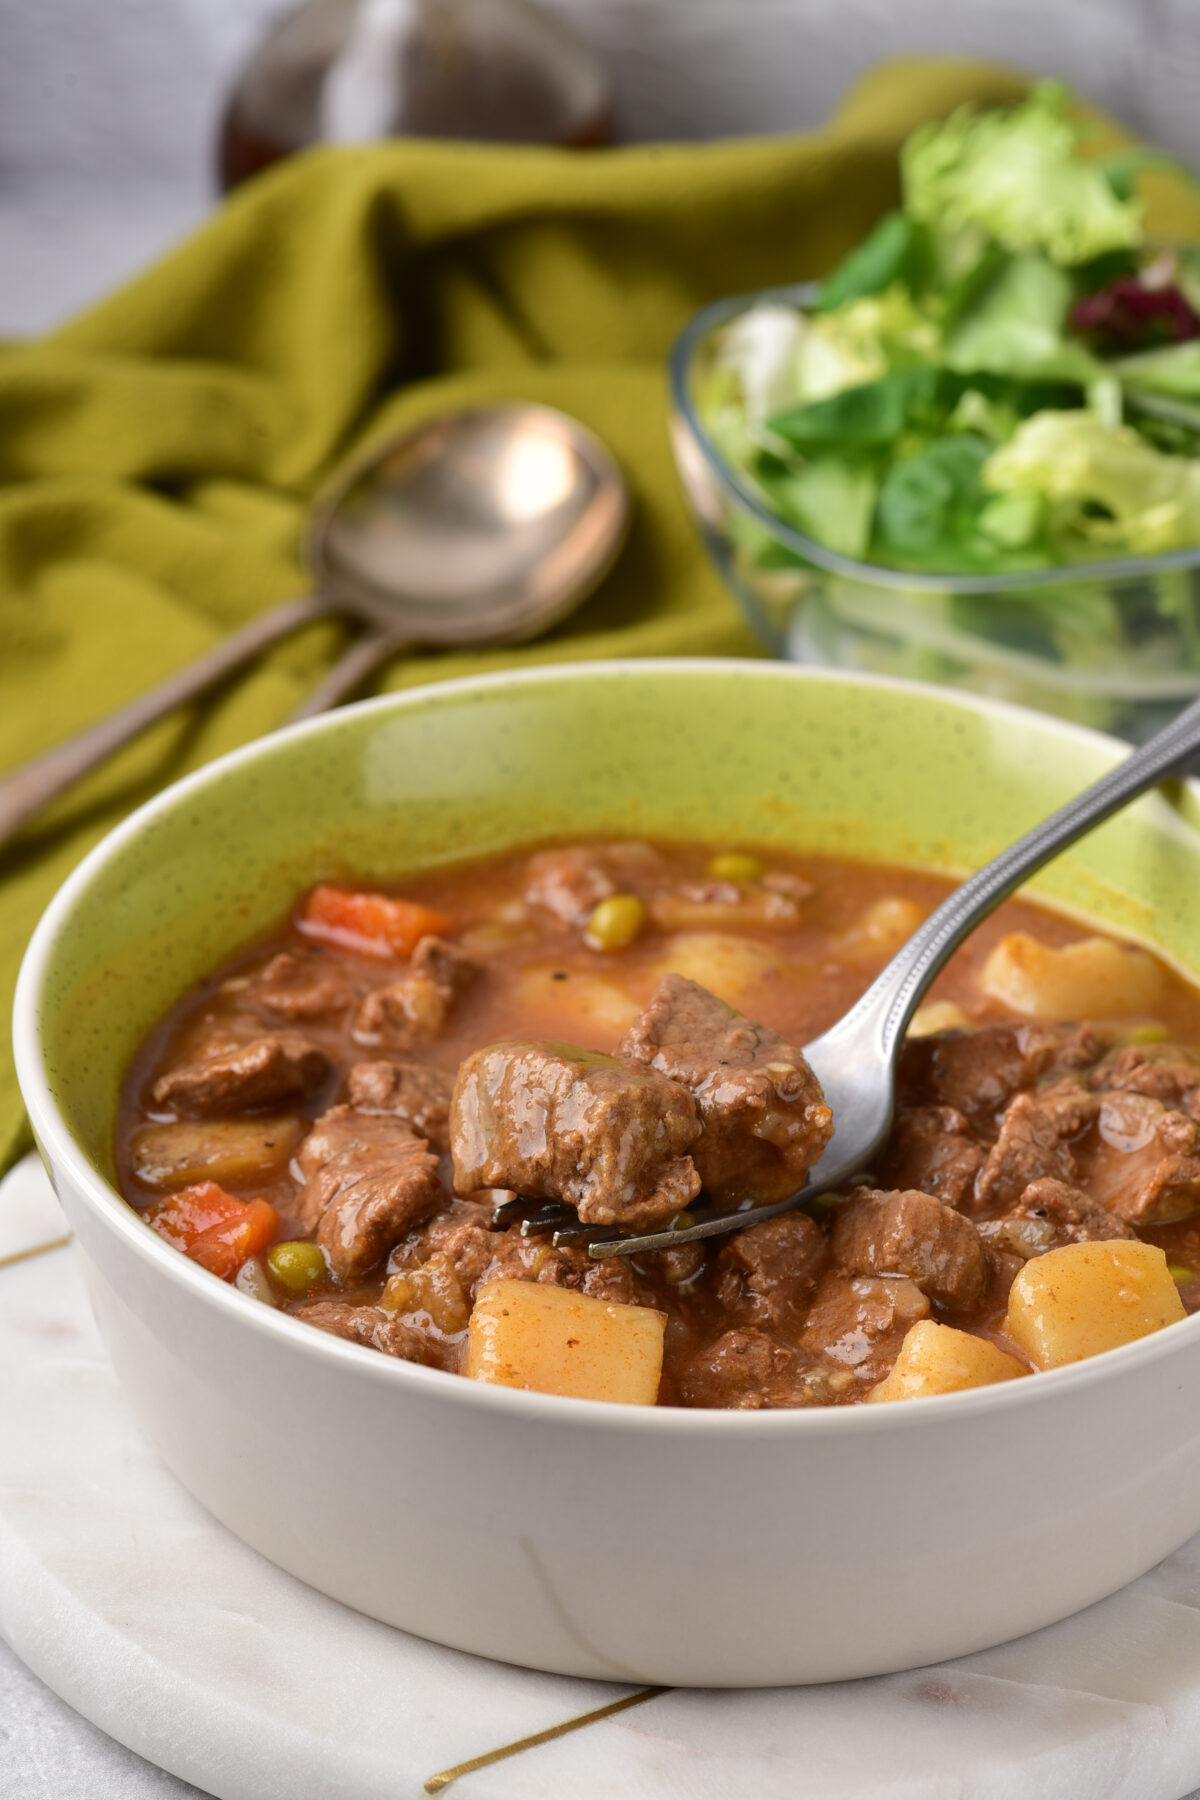 This is the best Instant Pot beef stew recipe that you'll ever make. It's quick and easy, and the end result is a hearty and delicious meal.